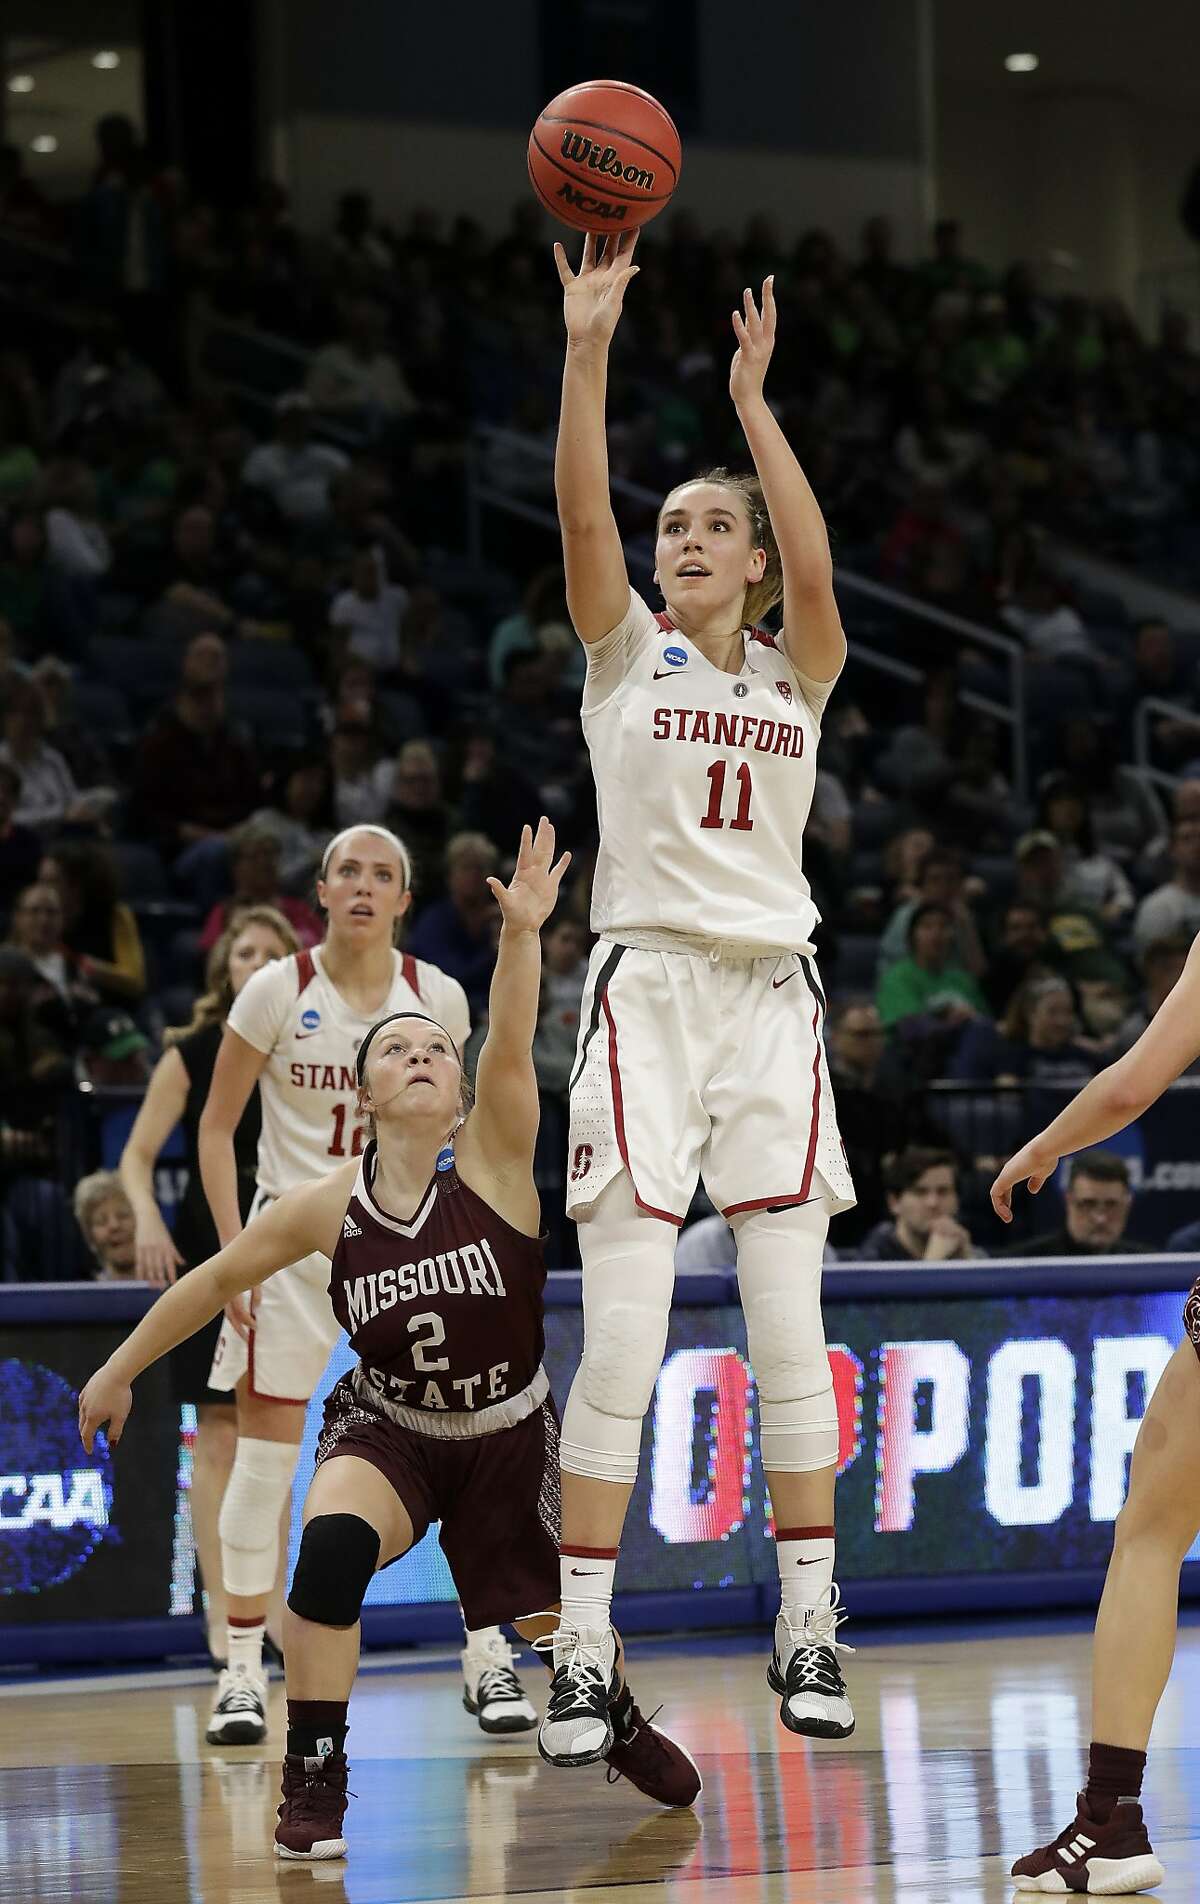 Stanford's Alanna Smith (11) shoots during the first half of a regional semifinal game against Missouri State in the NCAA women's college basketball tournament, Saturday, March 30, 2019, in Chicago. (AP Photo/Nam Y. Huh)